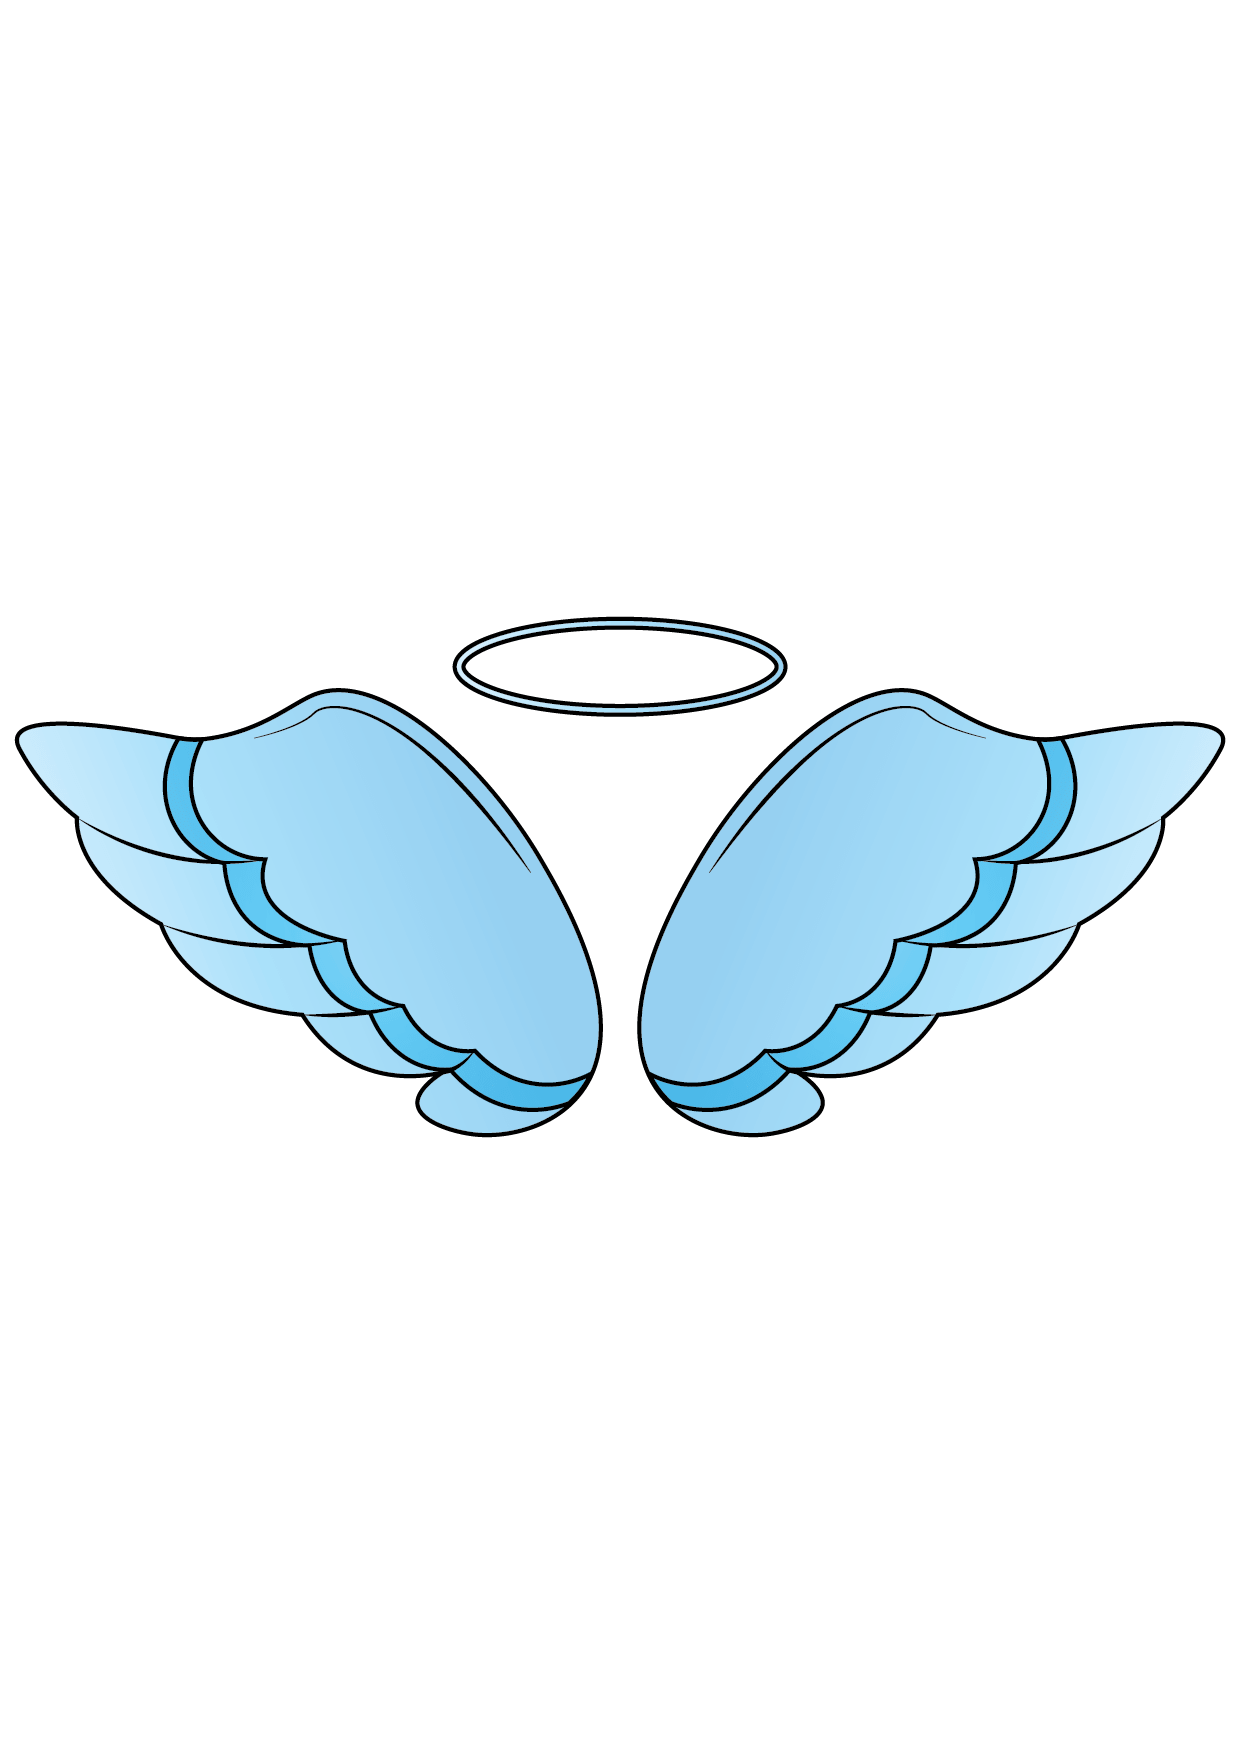 How to Draw An Angel's Wings Step by Step Printable